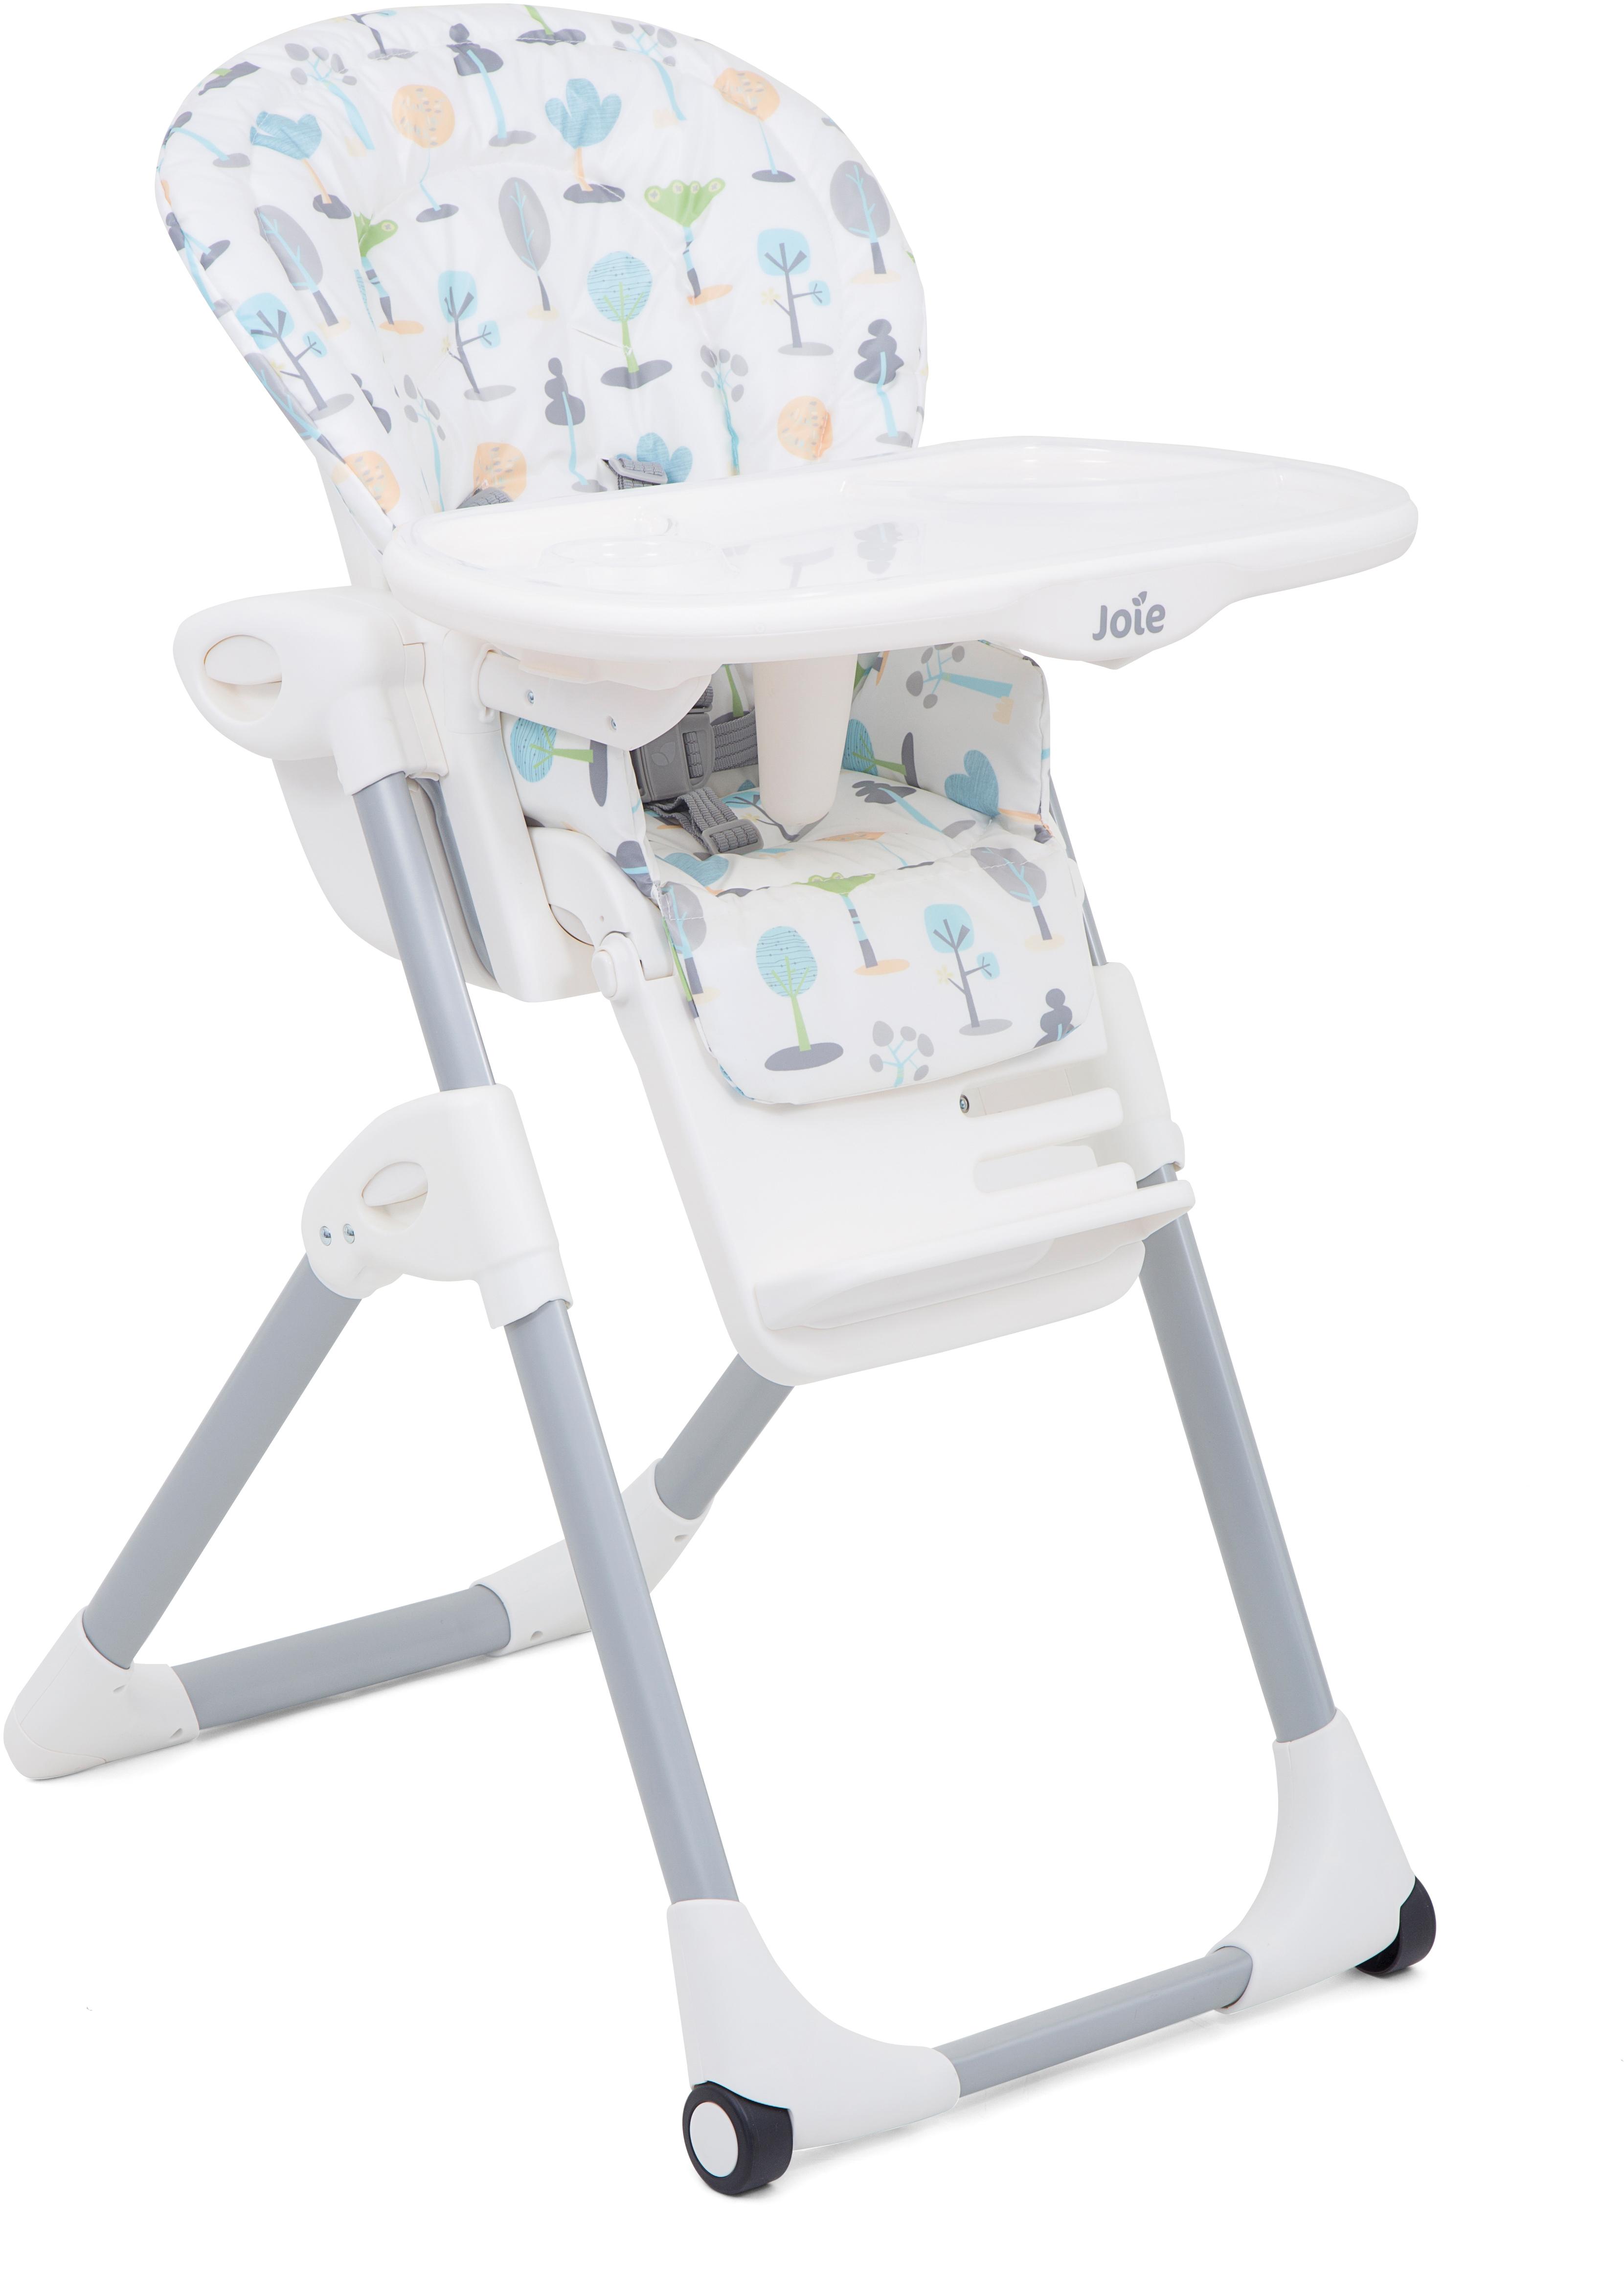 Joie Mimzy High Chair - Pastel Forest